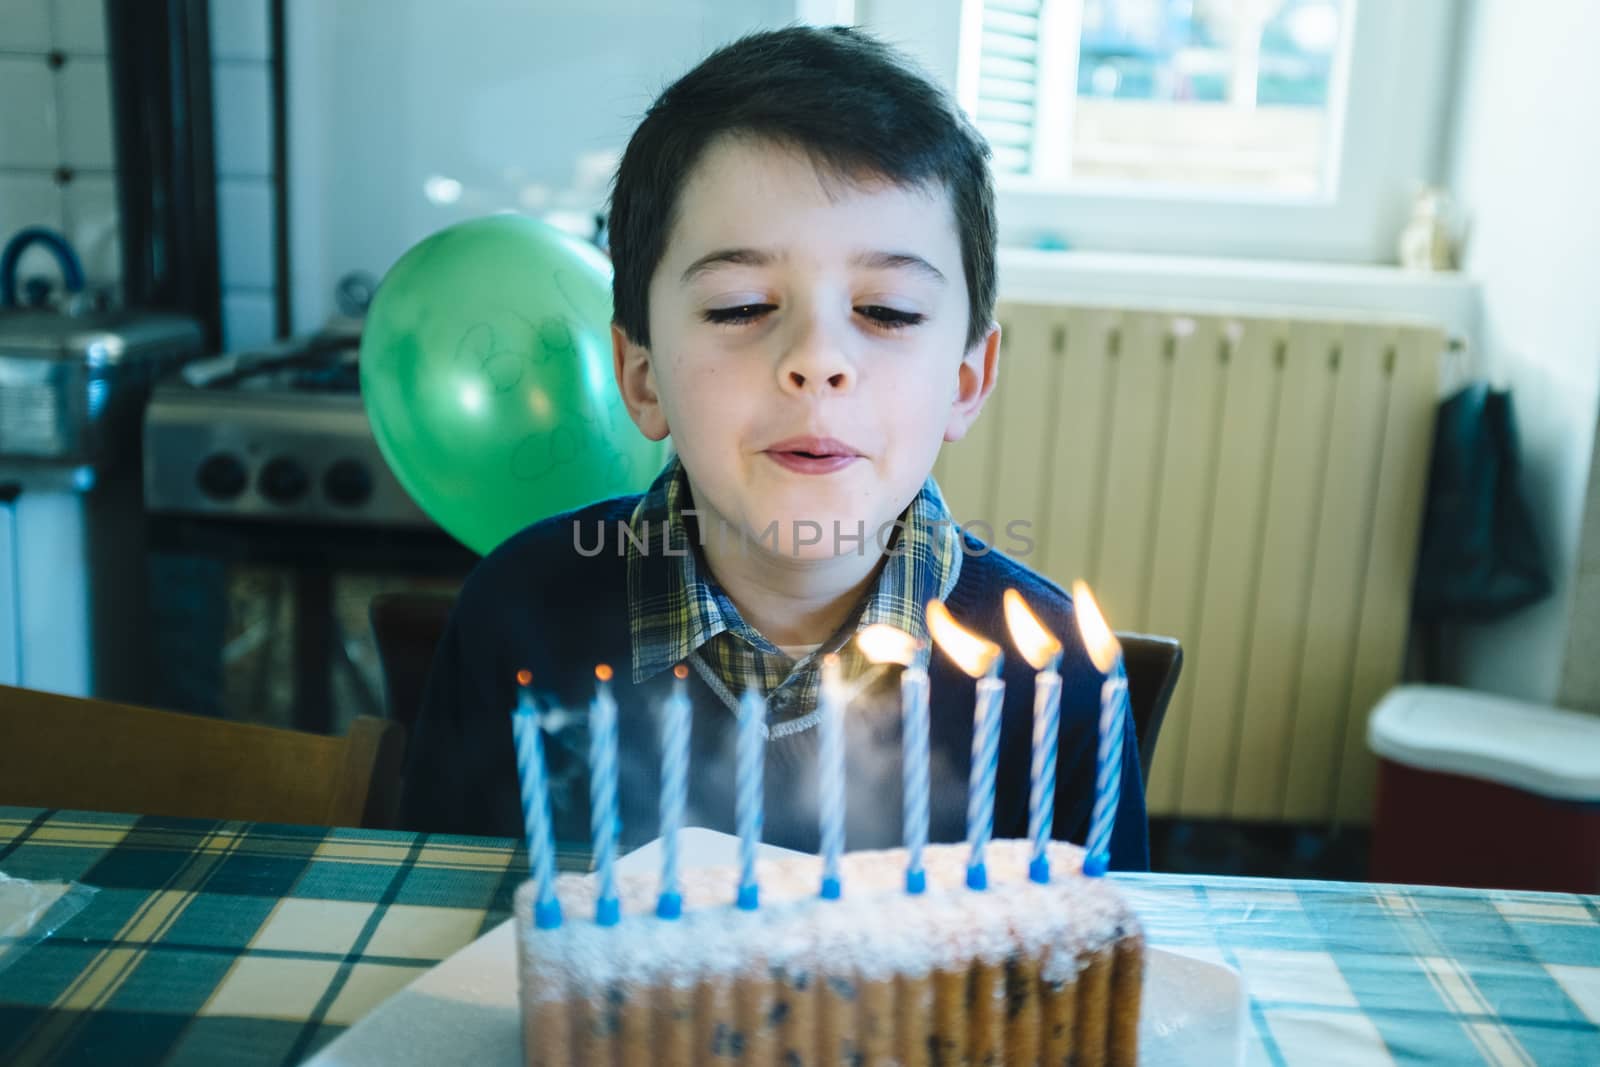 baby in the day of his ninth birthday blowing the candles on the cake, in the kitchen of his home